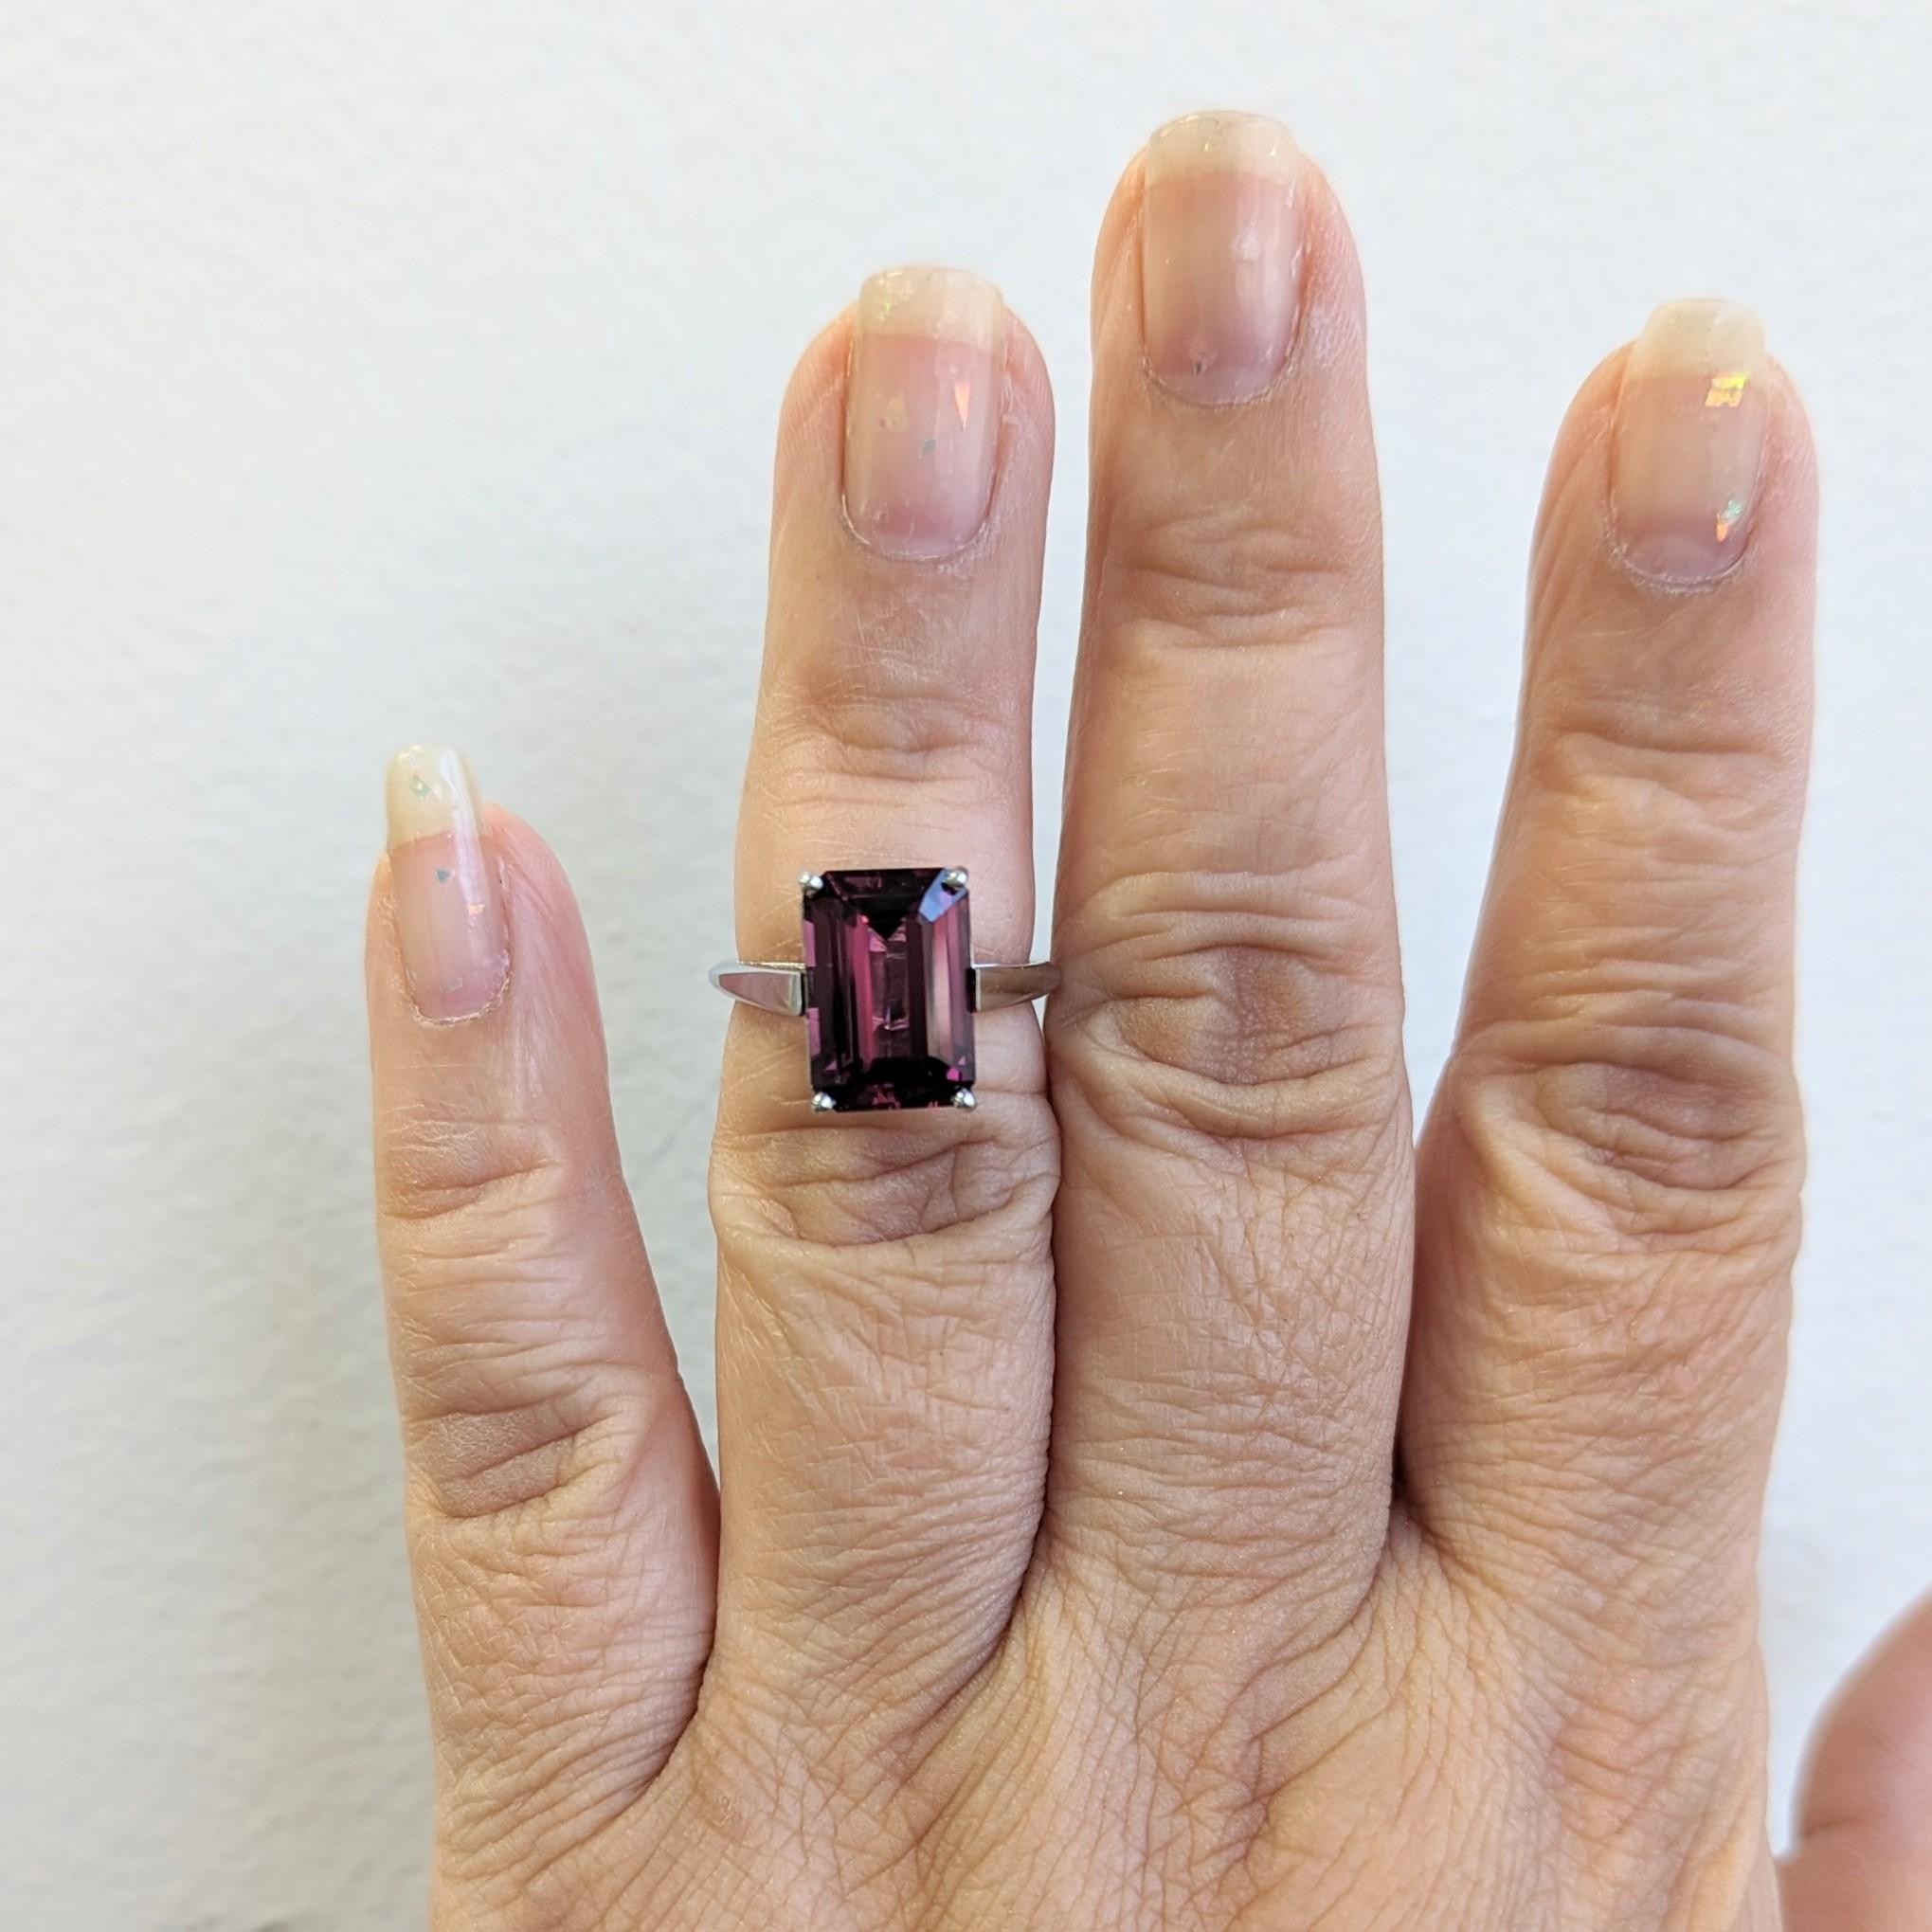 Beautiful 5.44 ct. purple spinel emerald cut in a handmade platinum ring.  Ring size 5.5.  